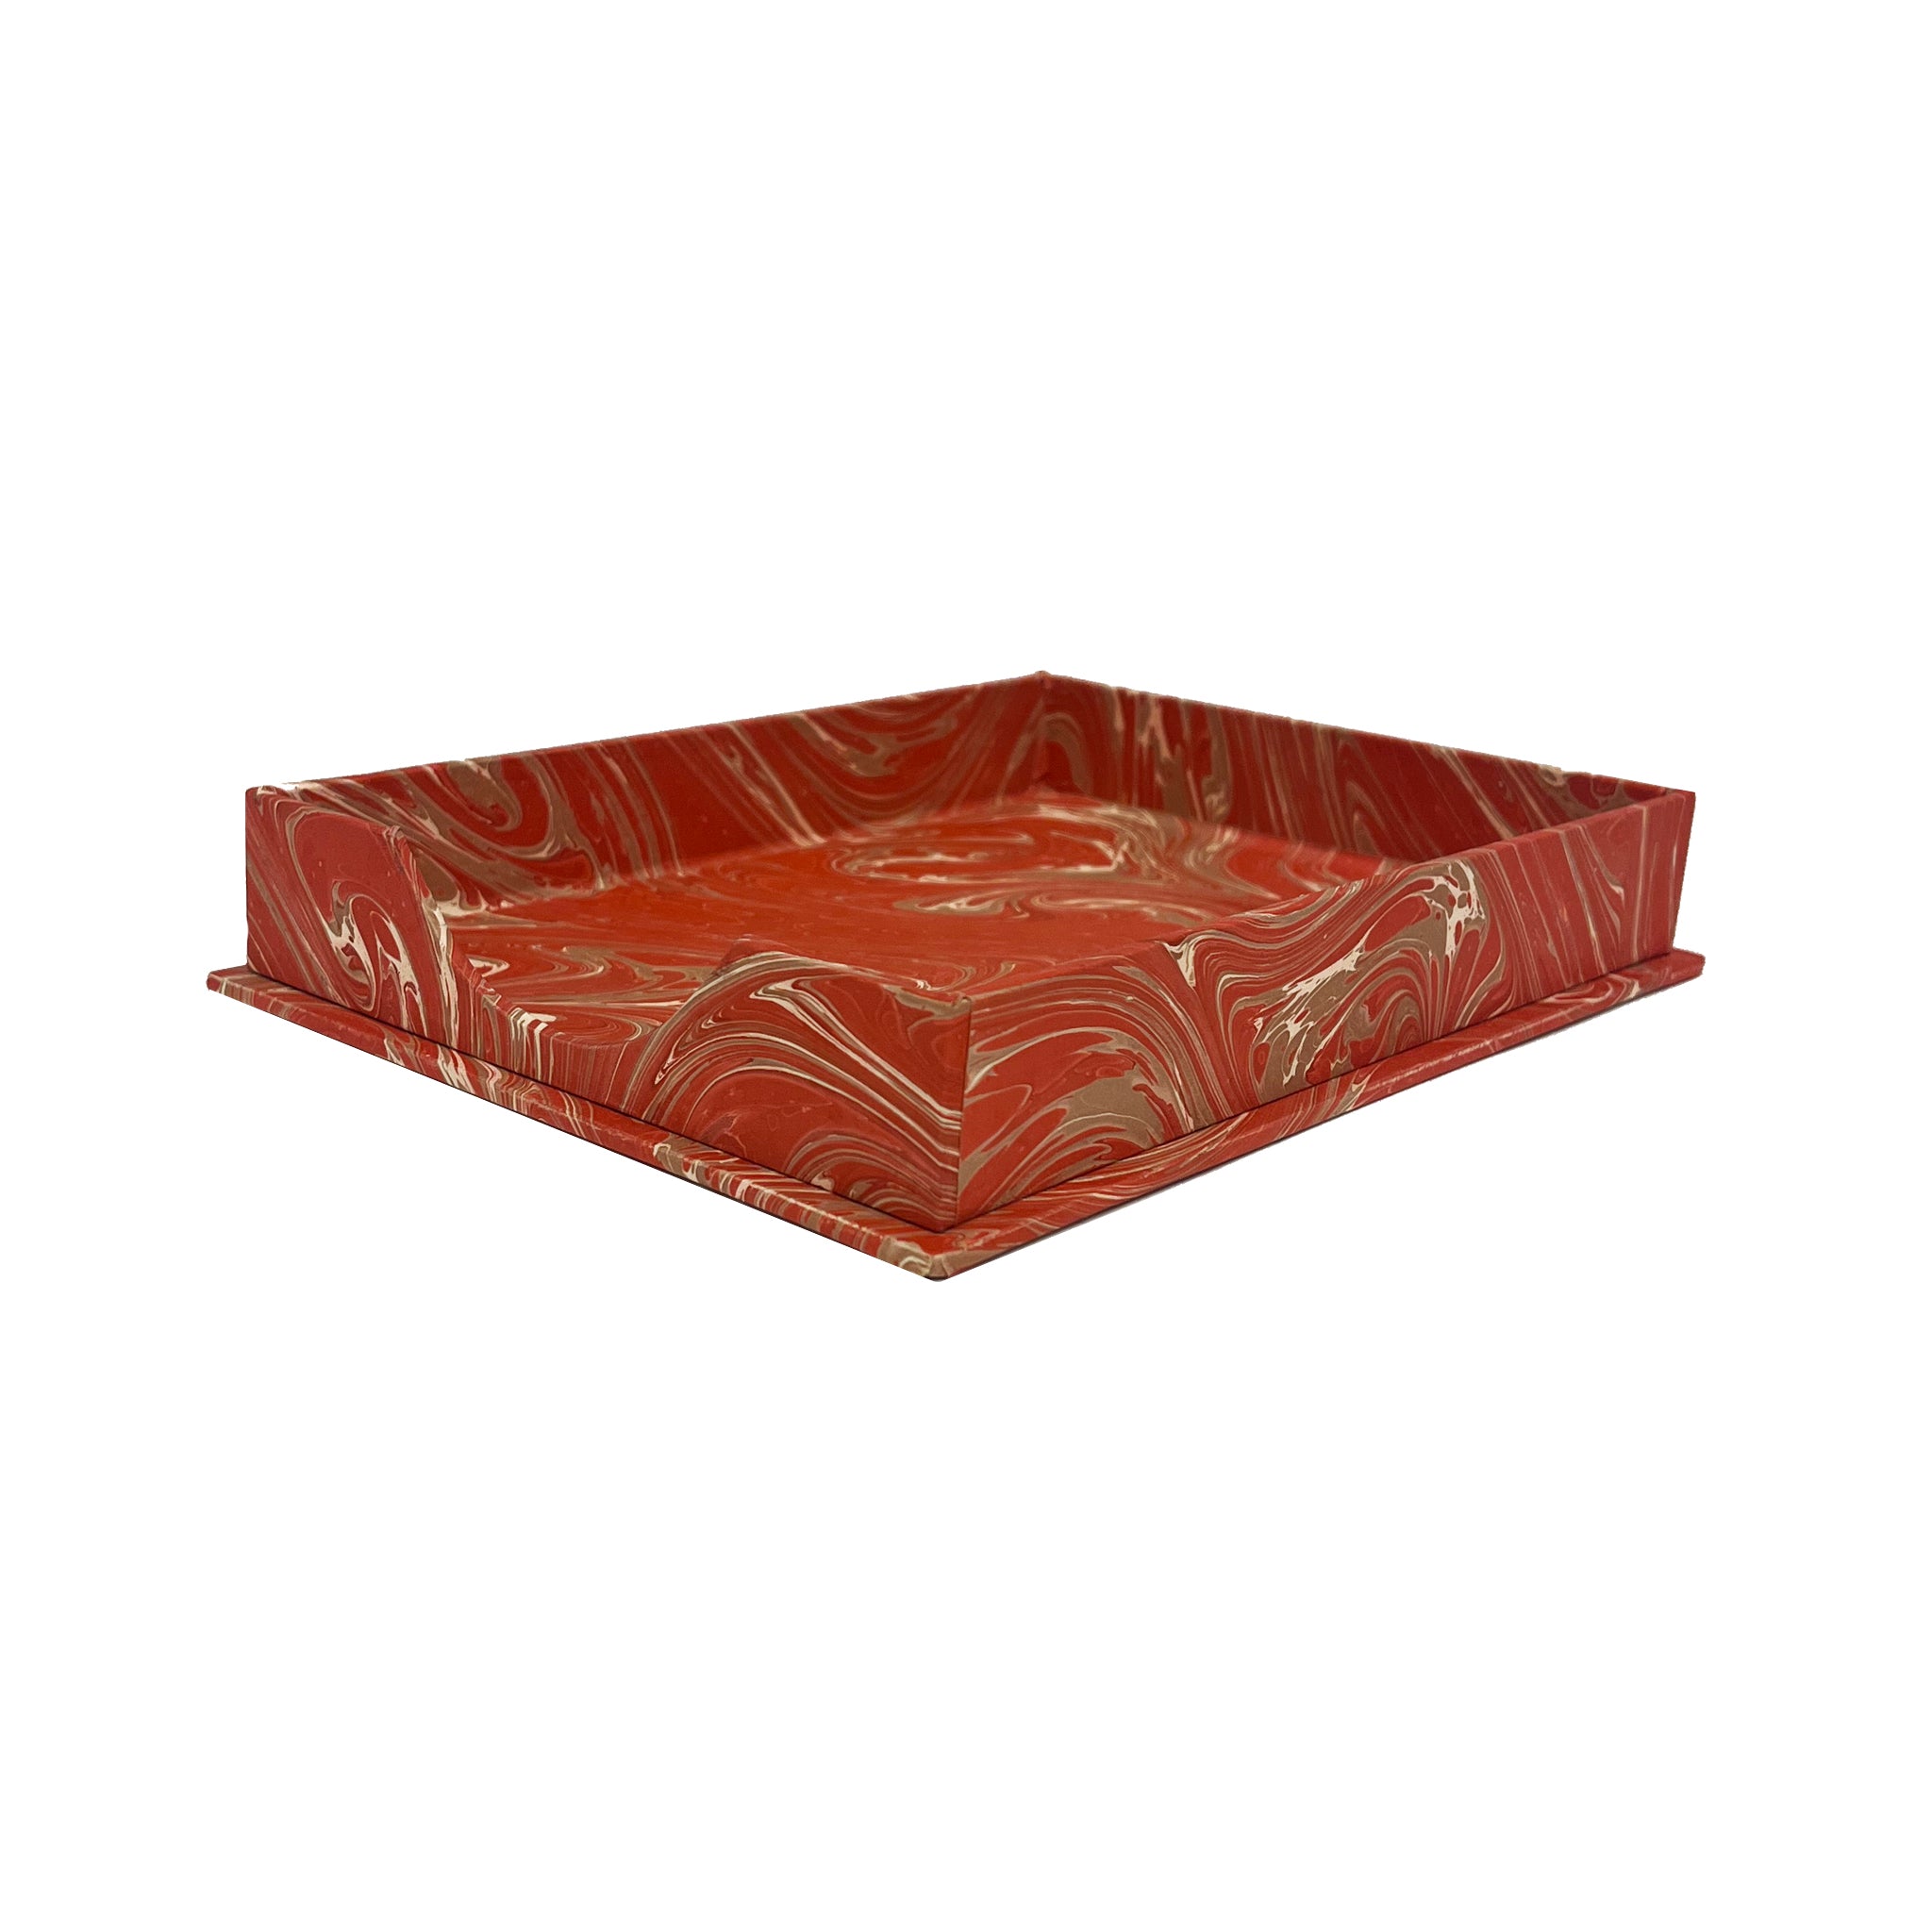 Hand-Marbled Paper-Covered Notepad Holder